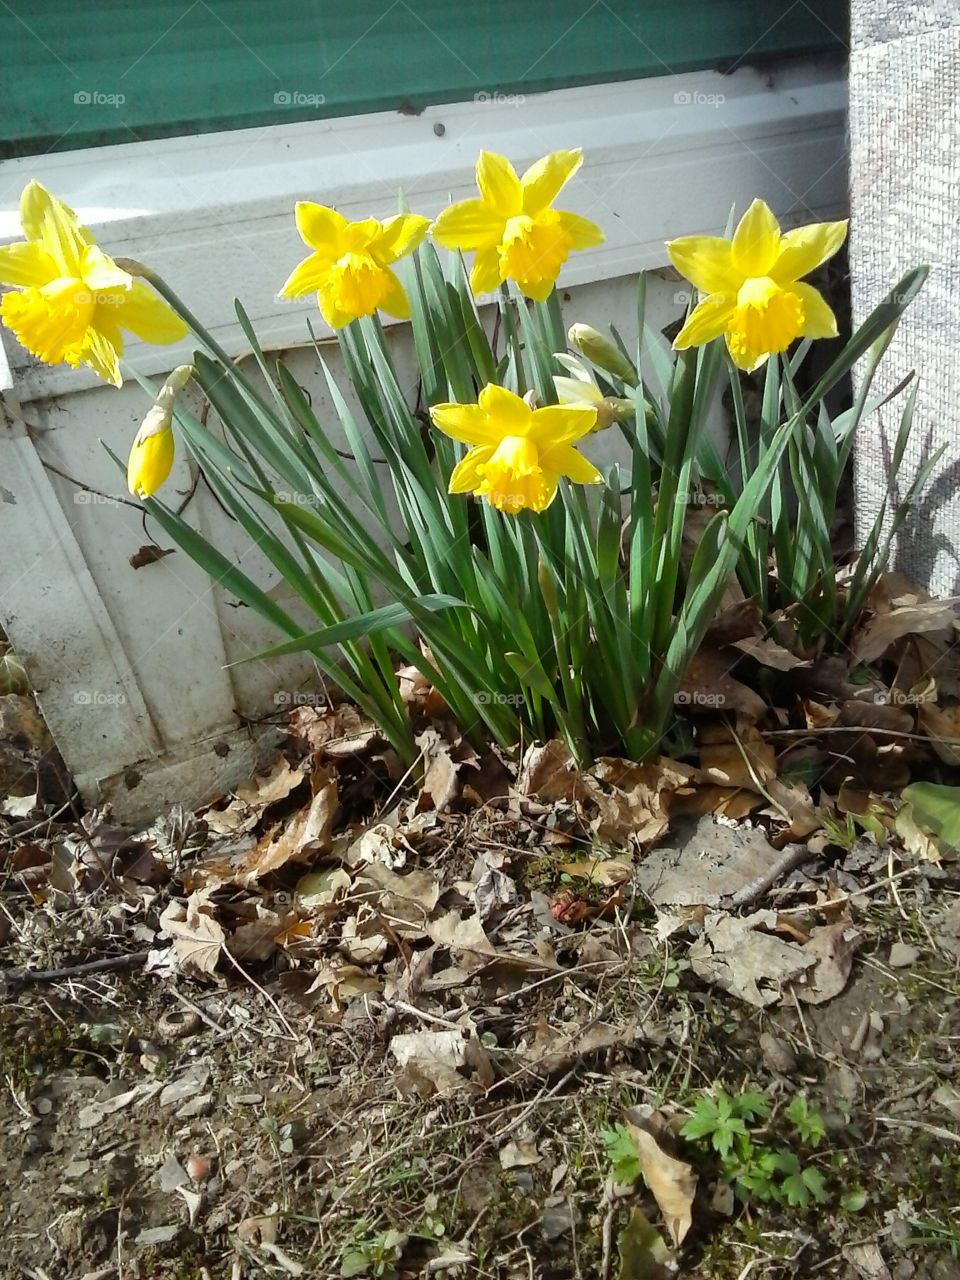 Yellow daffodils bloomed for s. I been waiting to see these daffodils grow in spring season's. I can only enjoy them outside since I am allergic to the